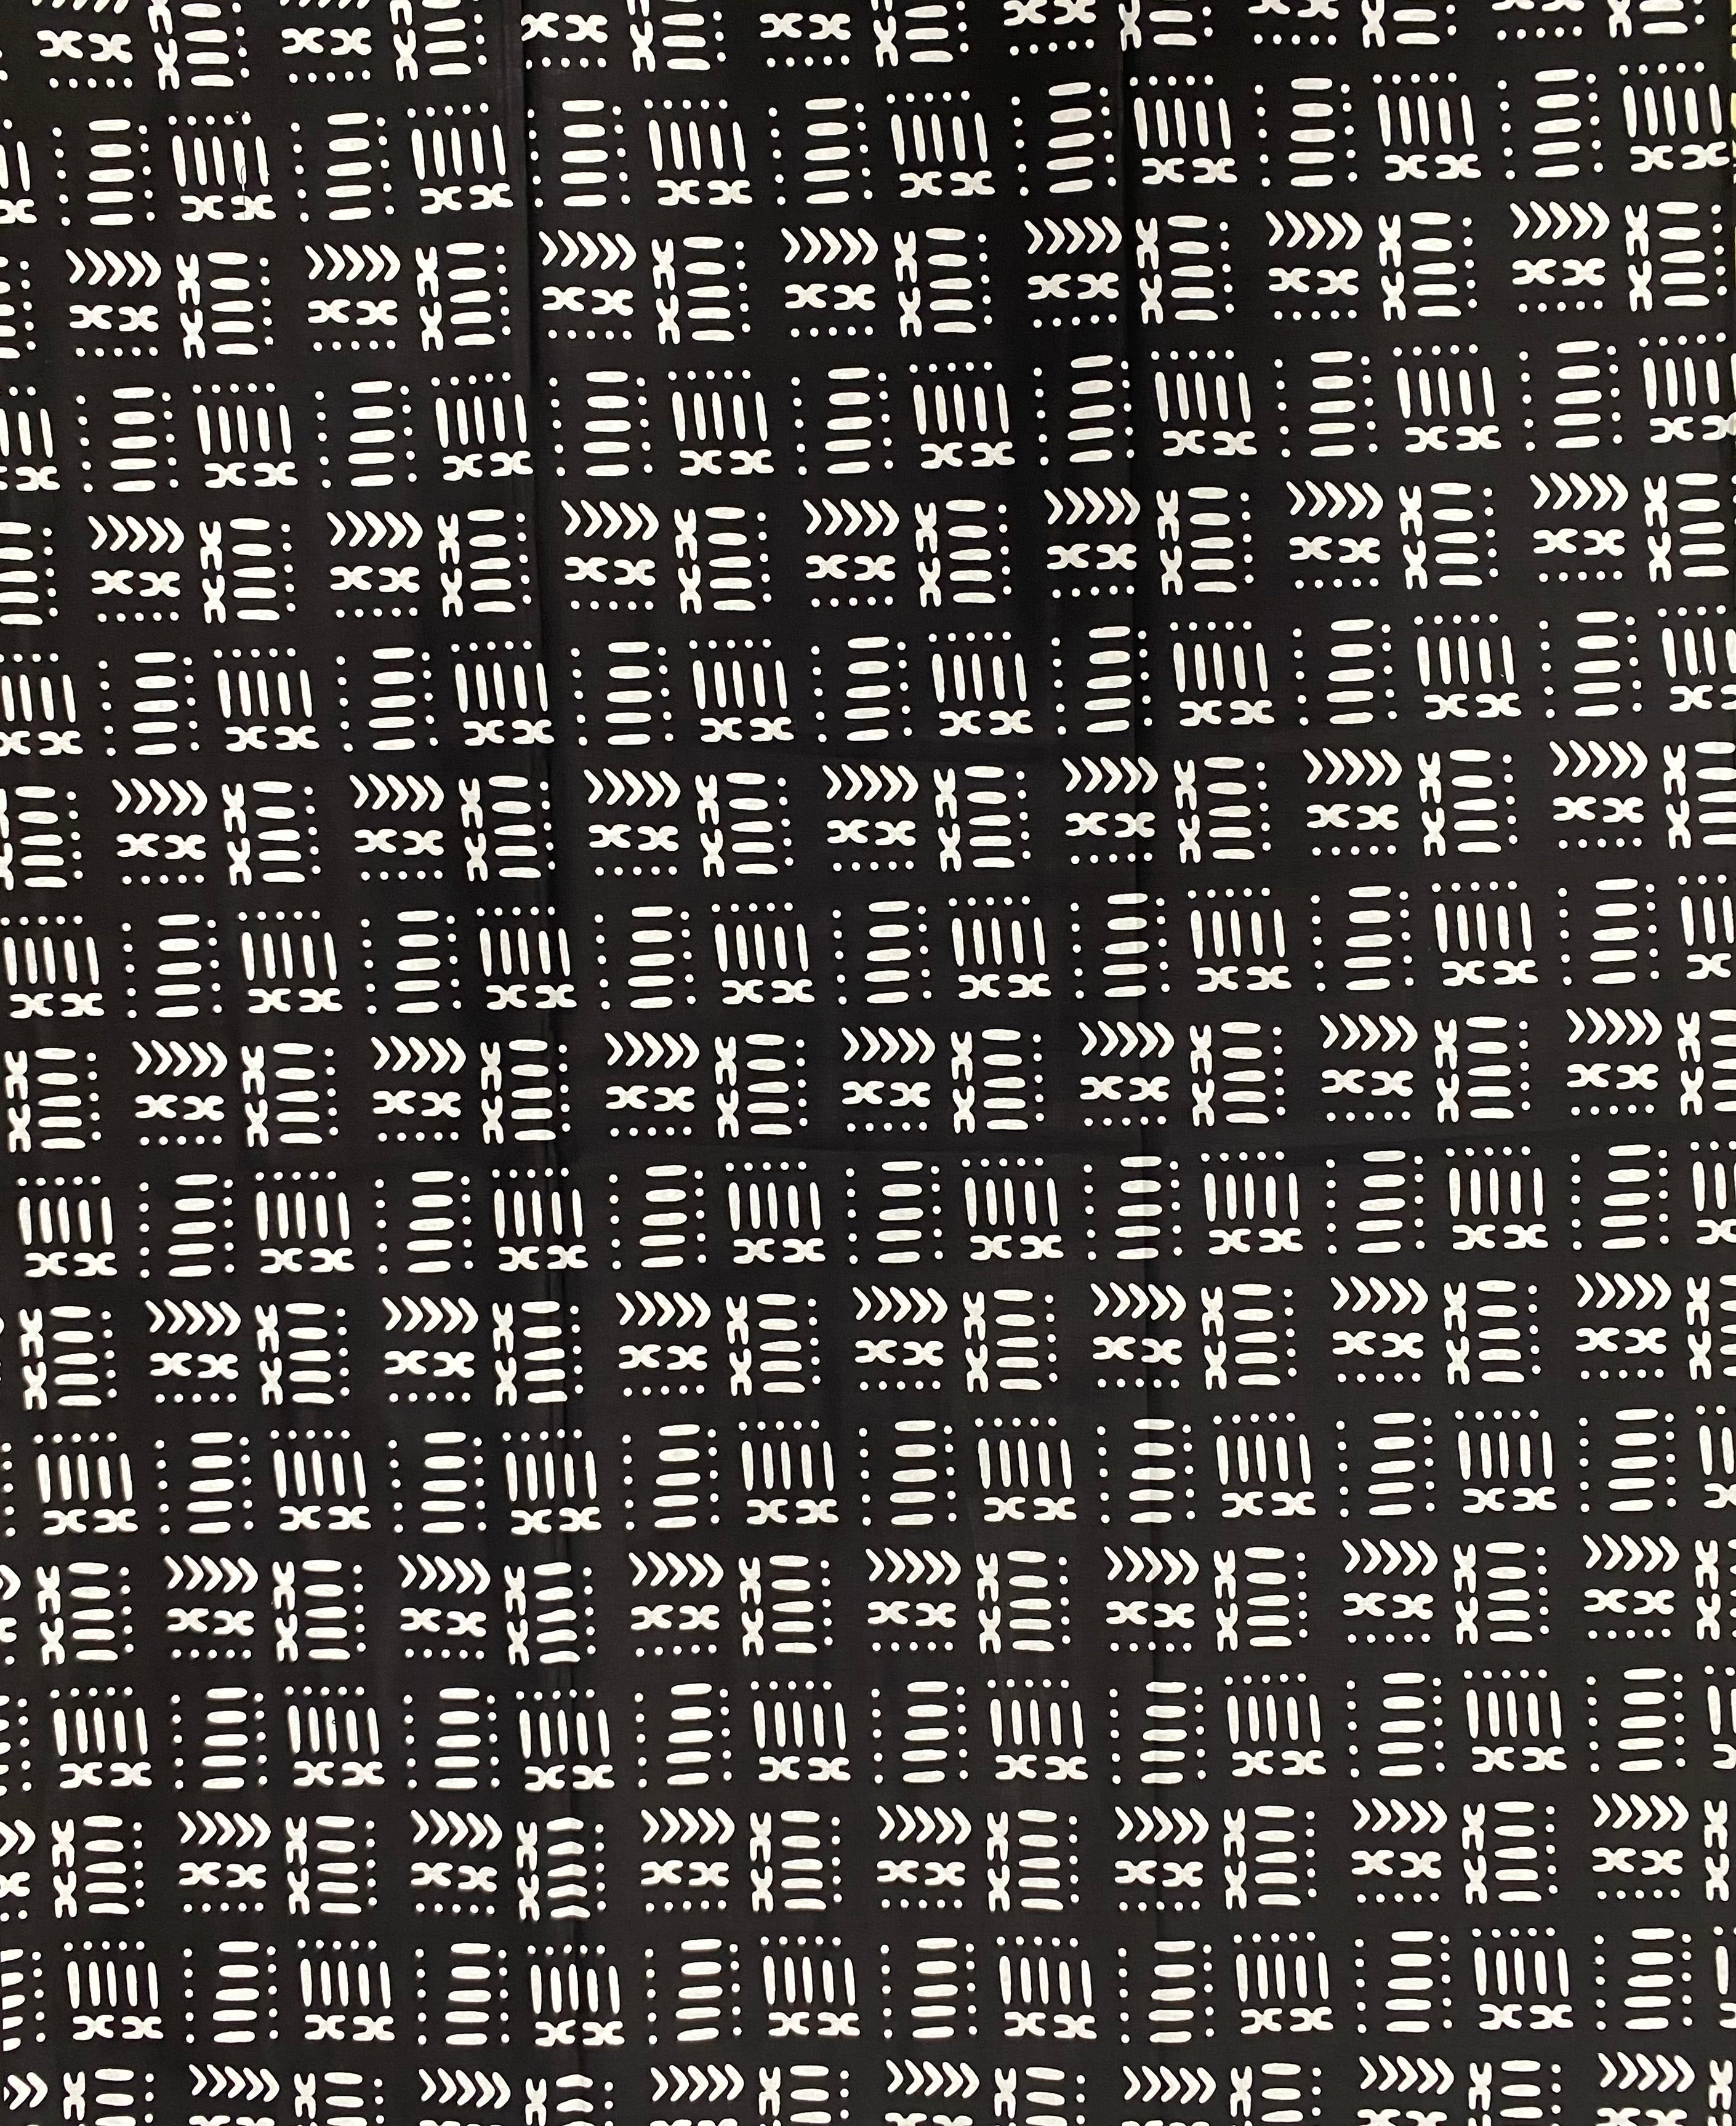 Mighty Motif African Print Fabric - 100% Cotton, 44" Wide, Bold and Striking